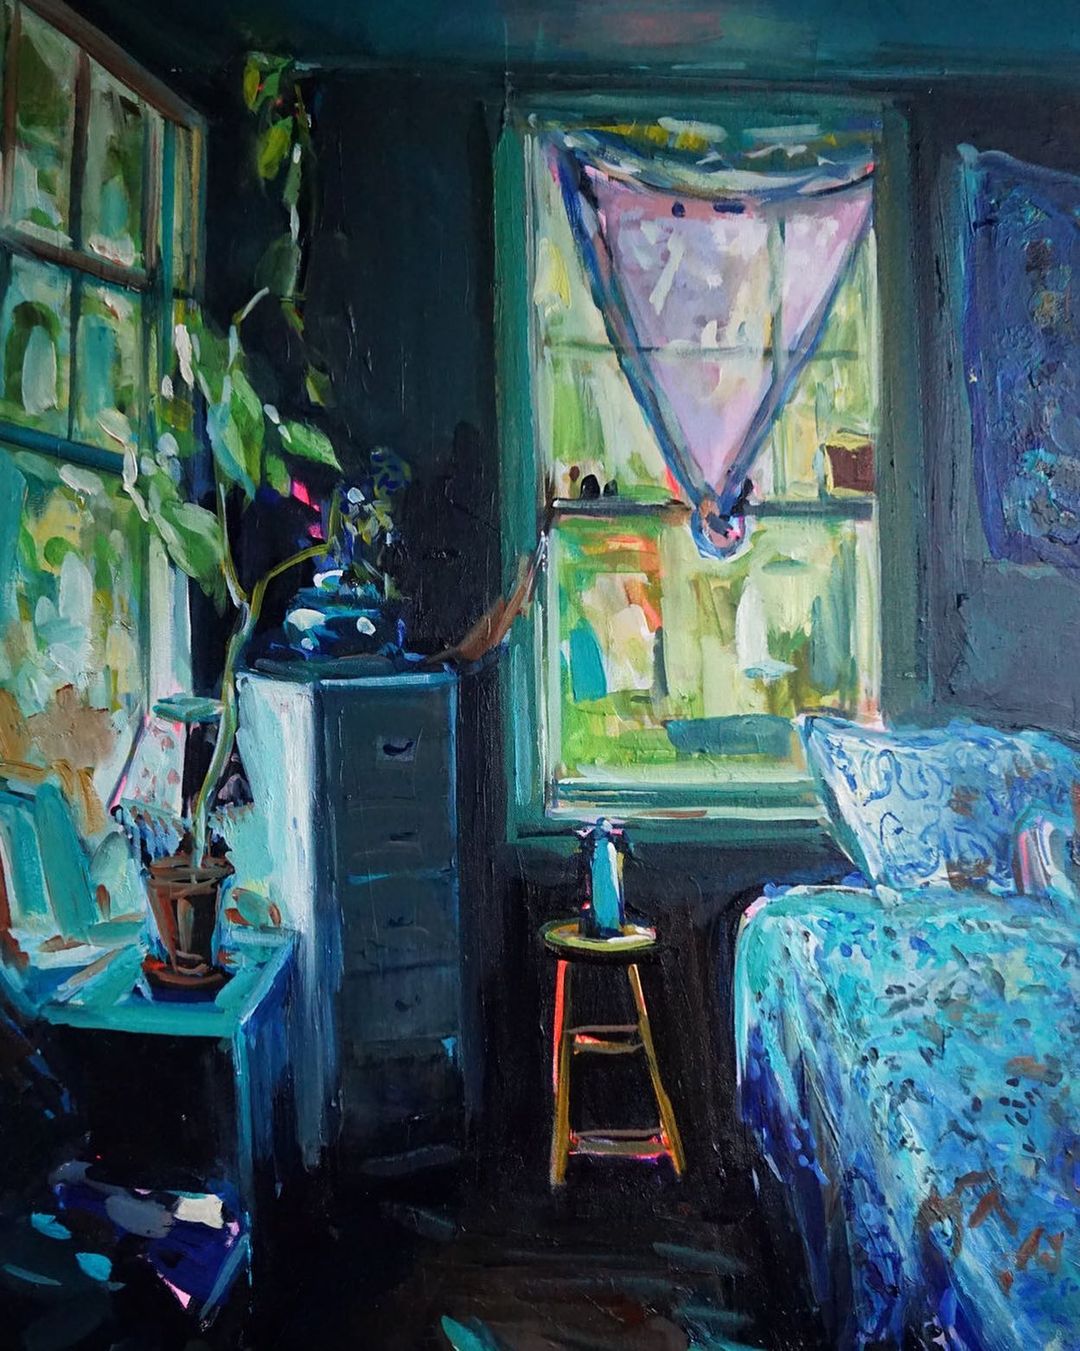 Sublime Paintings Of Intimate Home Spaces By Ekaterina Popova 4